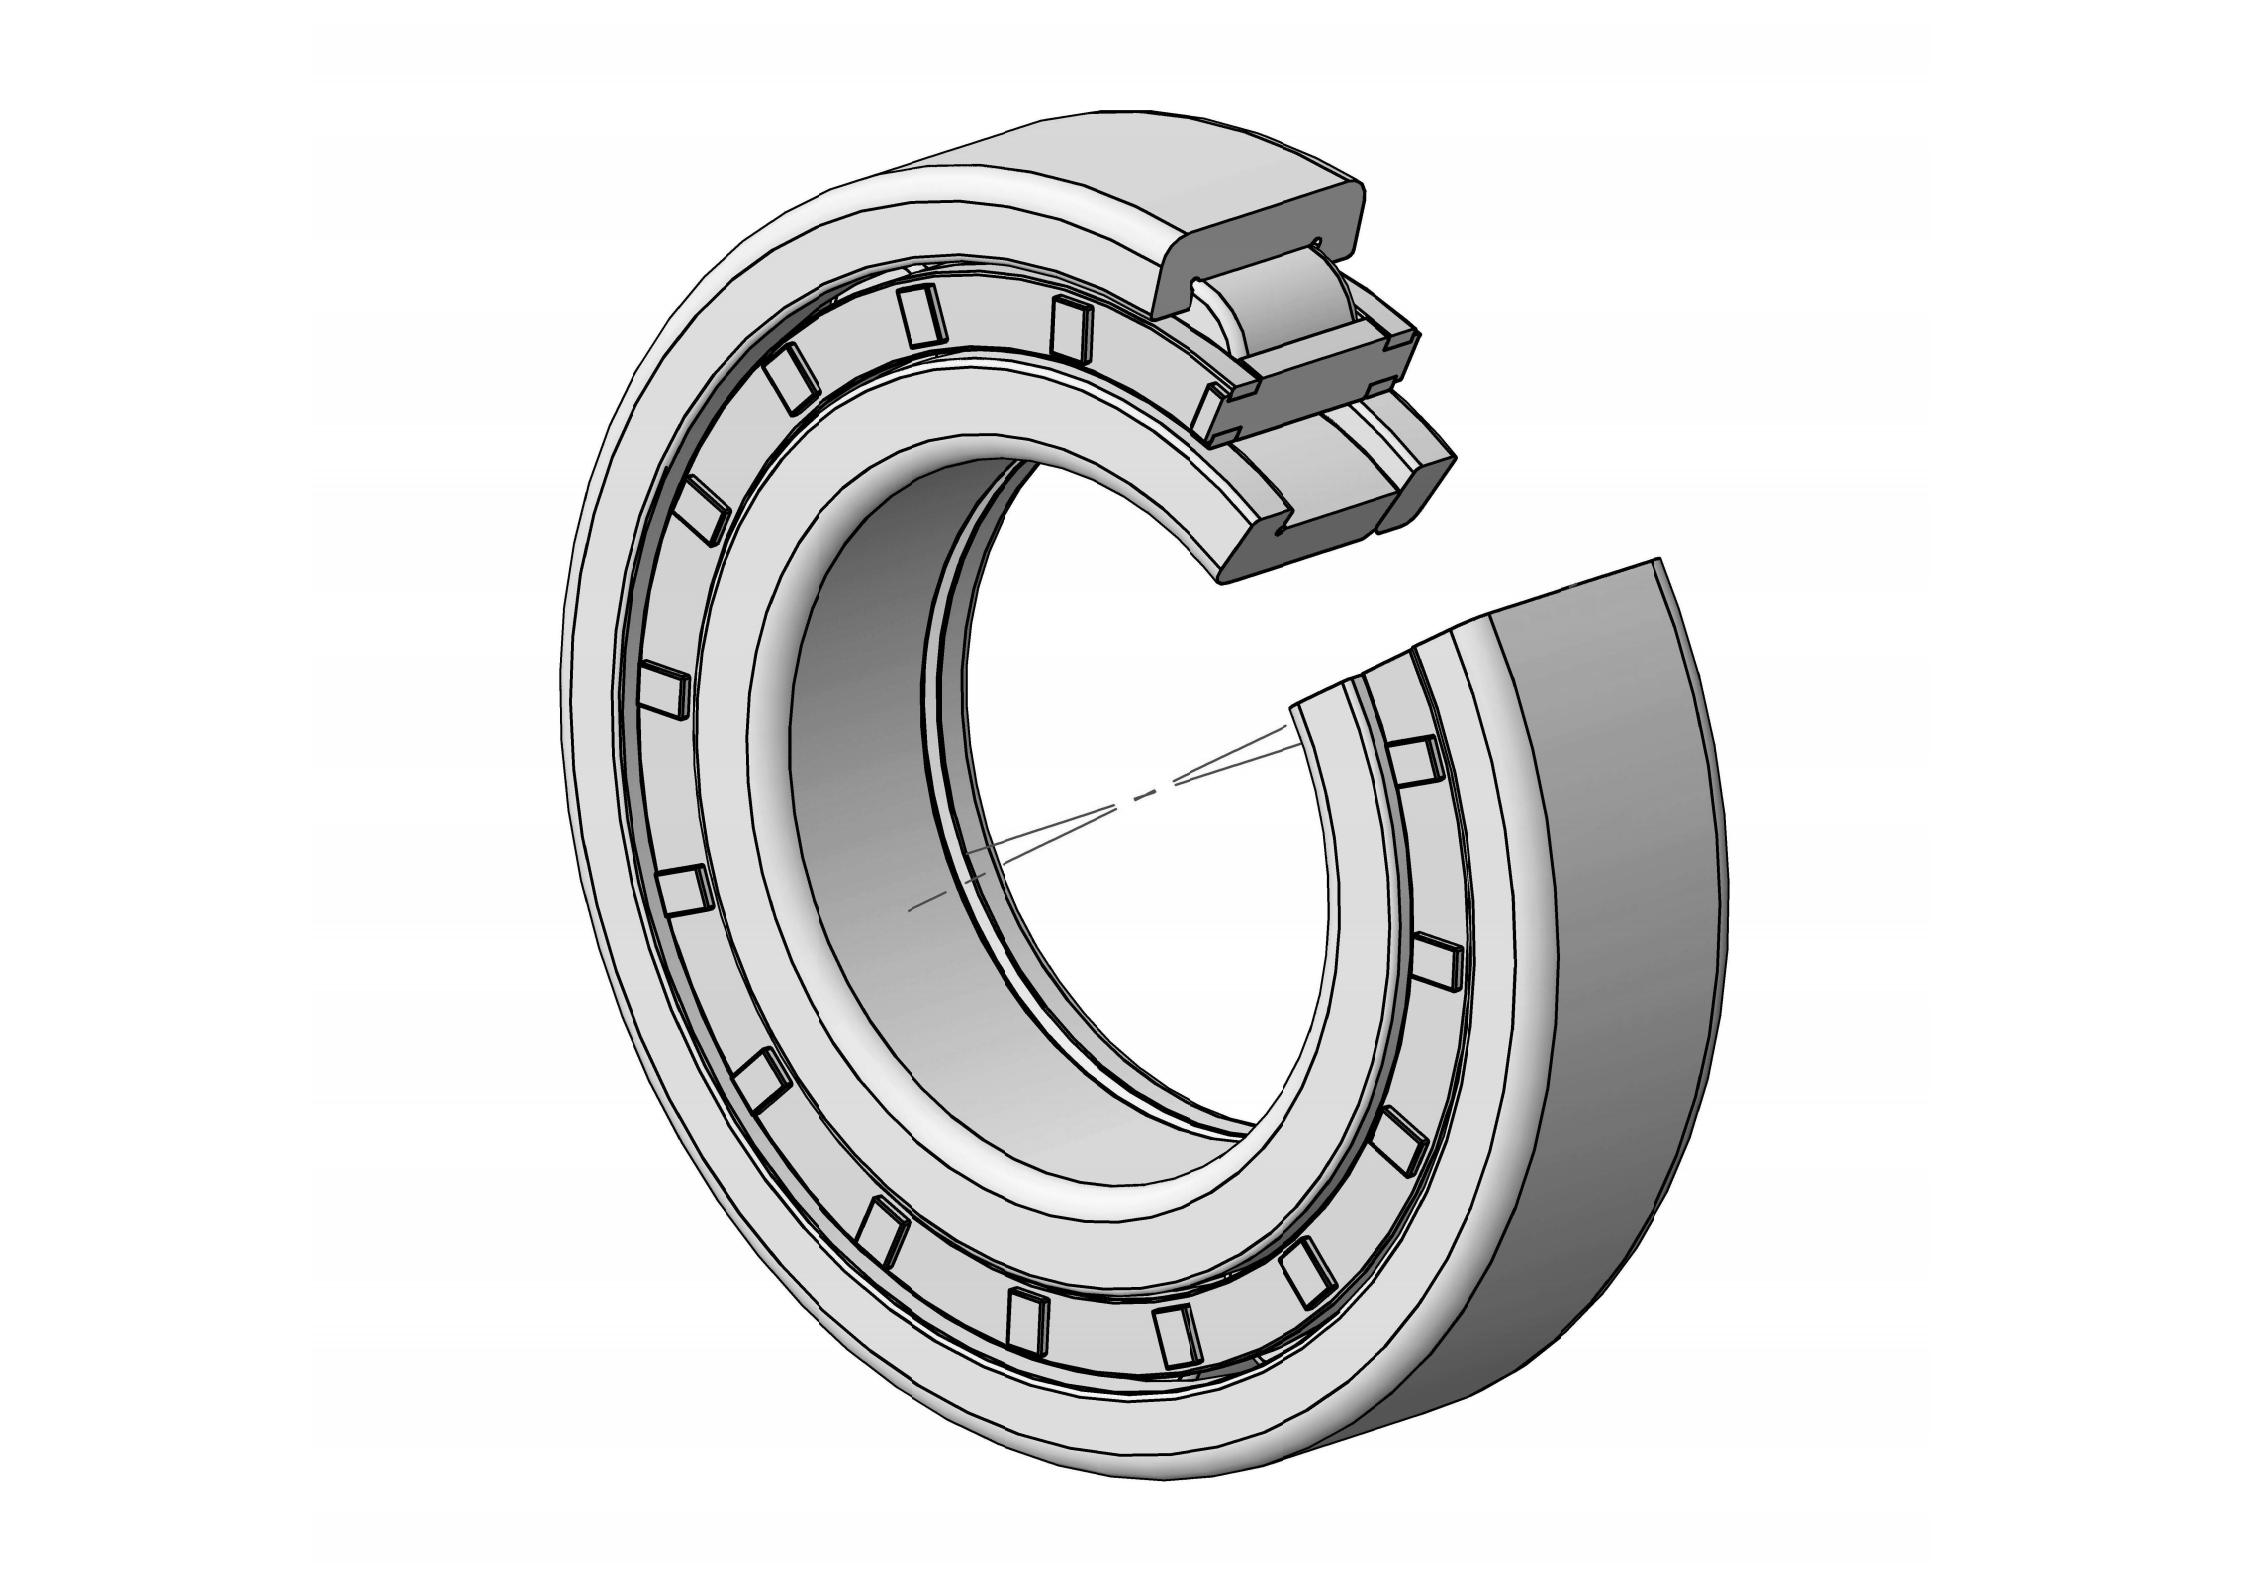 NUP319-EM Single Row Cylindrical roller bearing